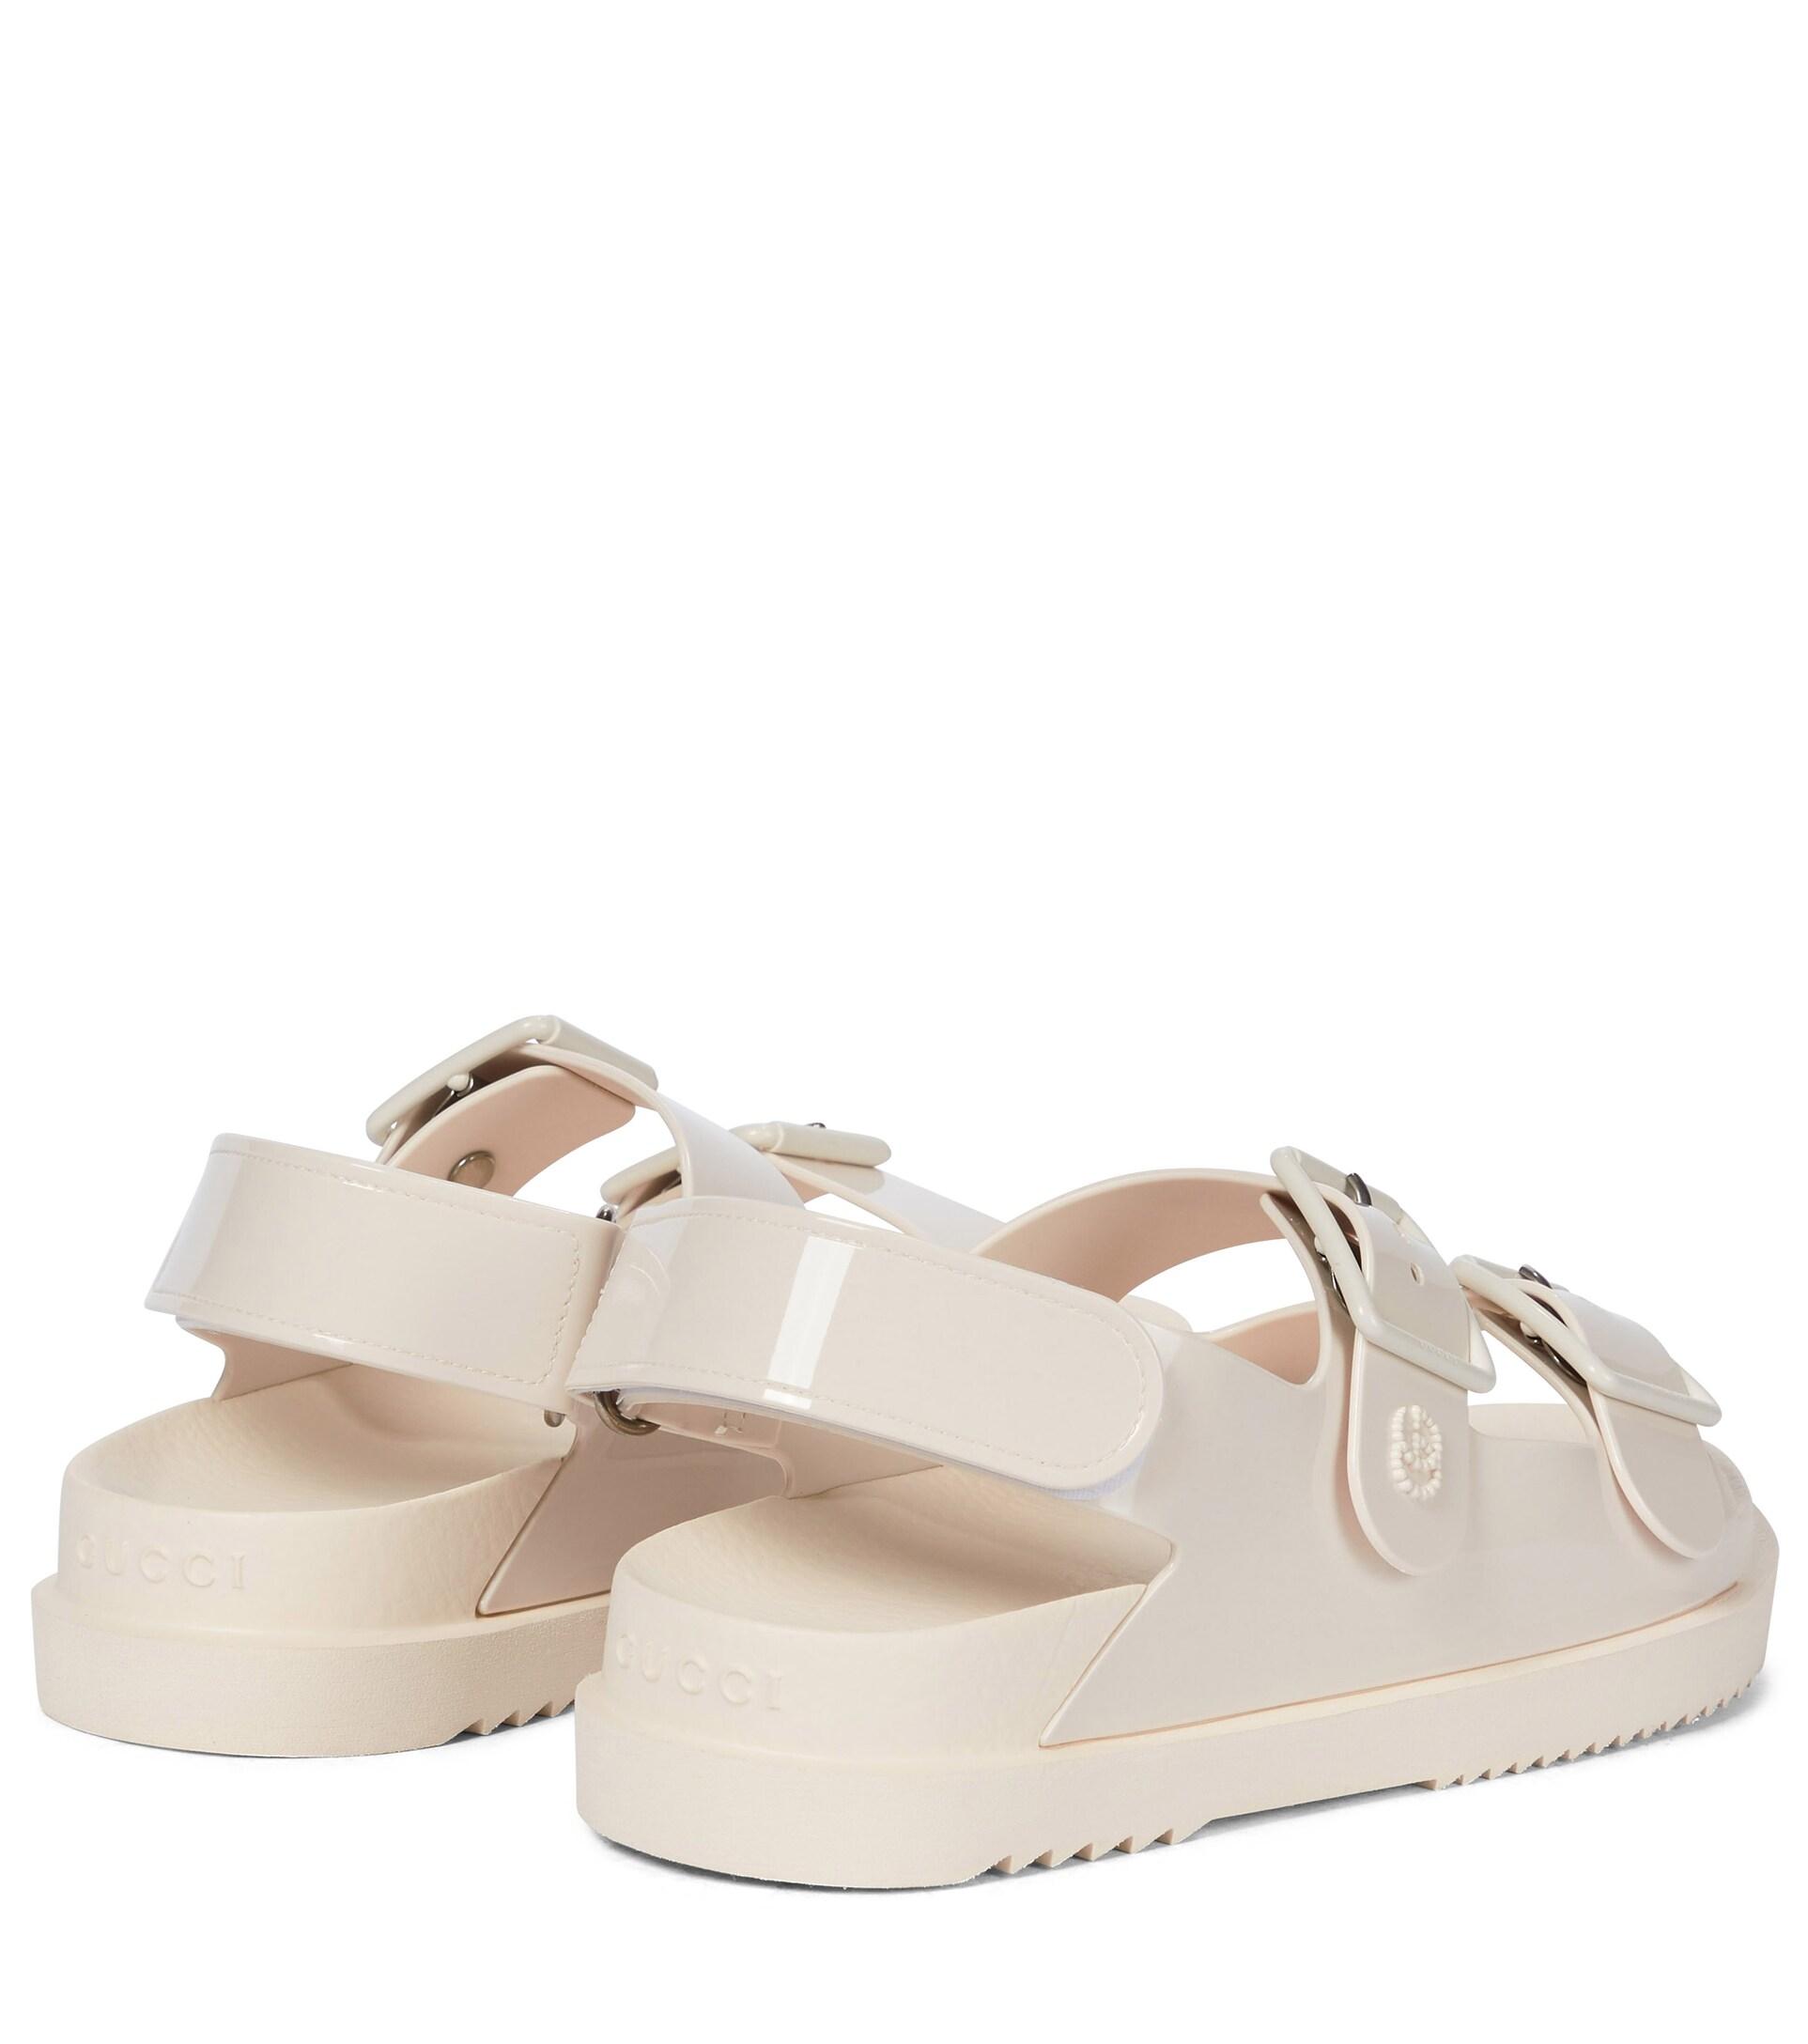 Gucci Rubber Sandals in White | Lyst